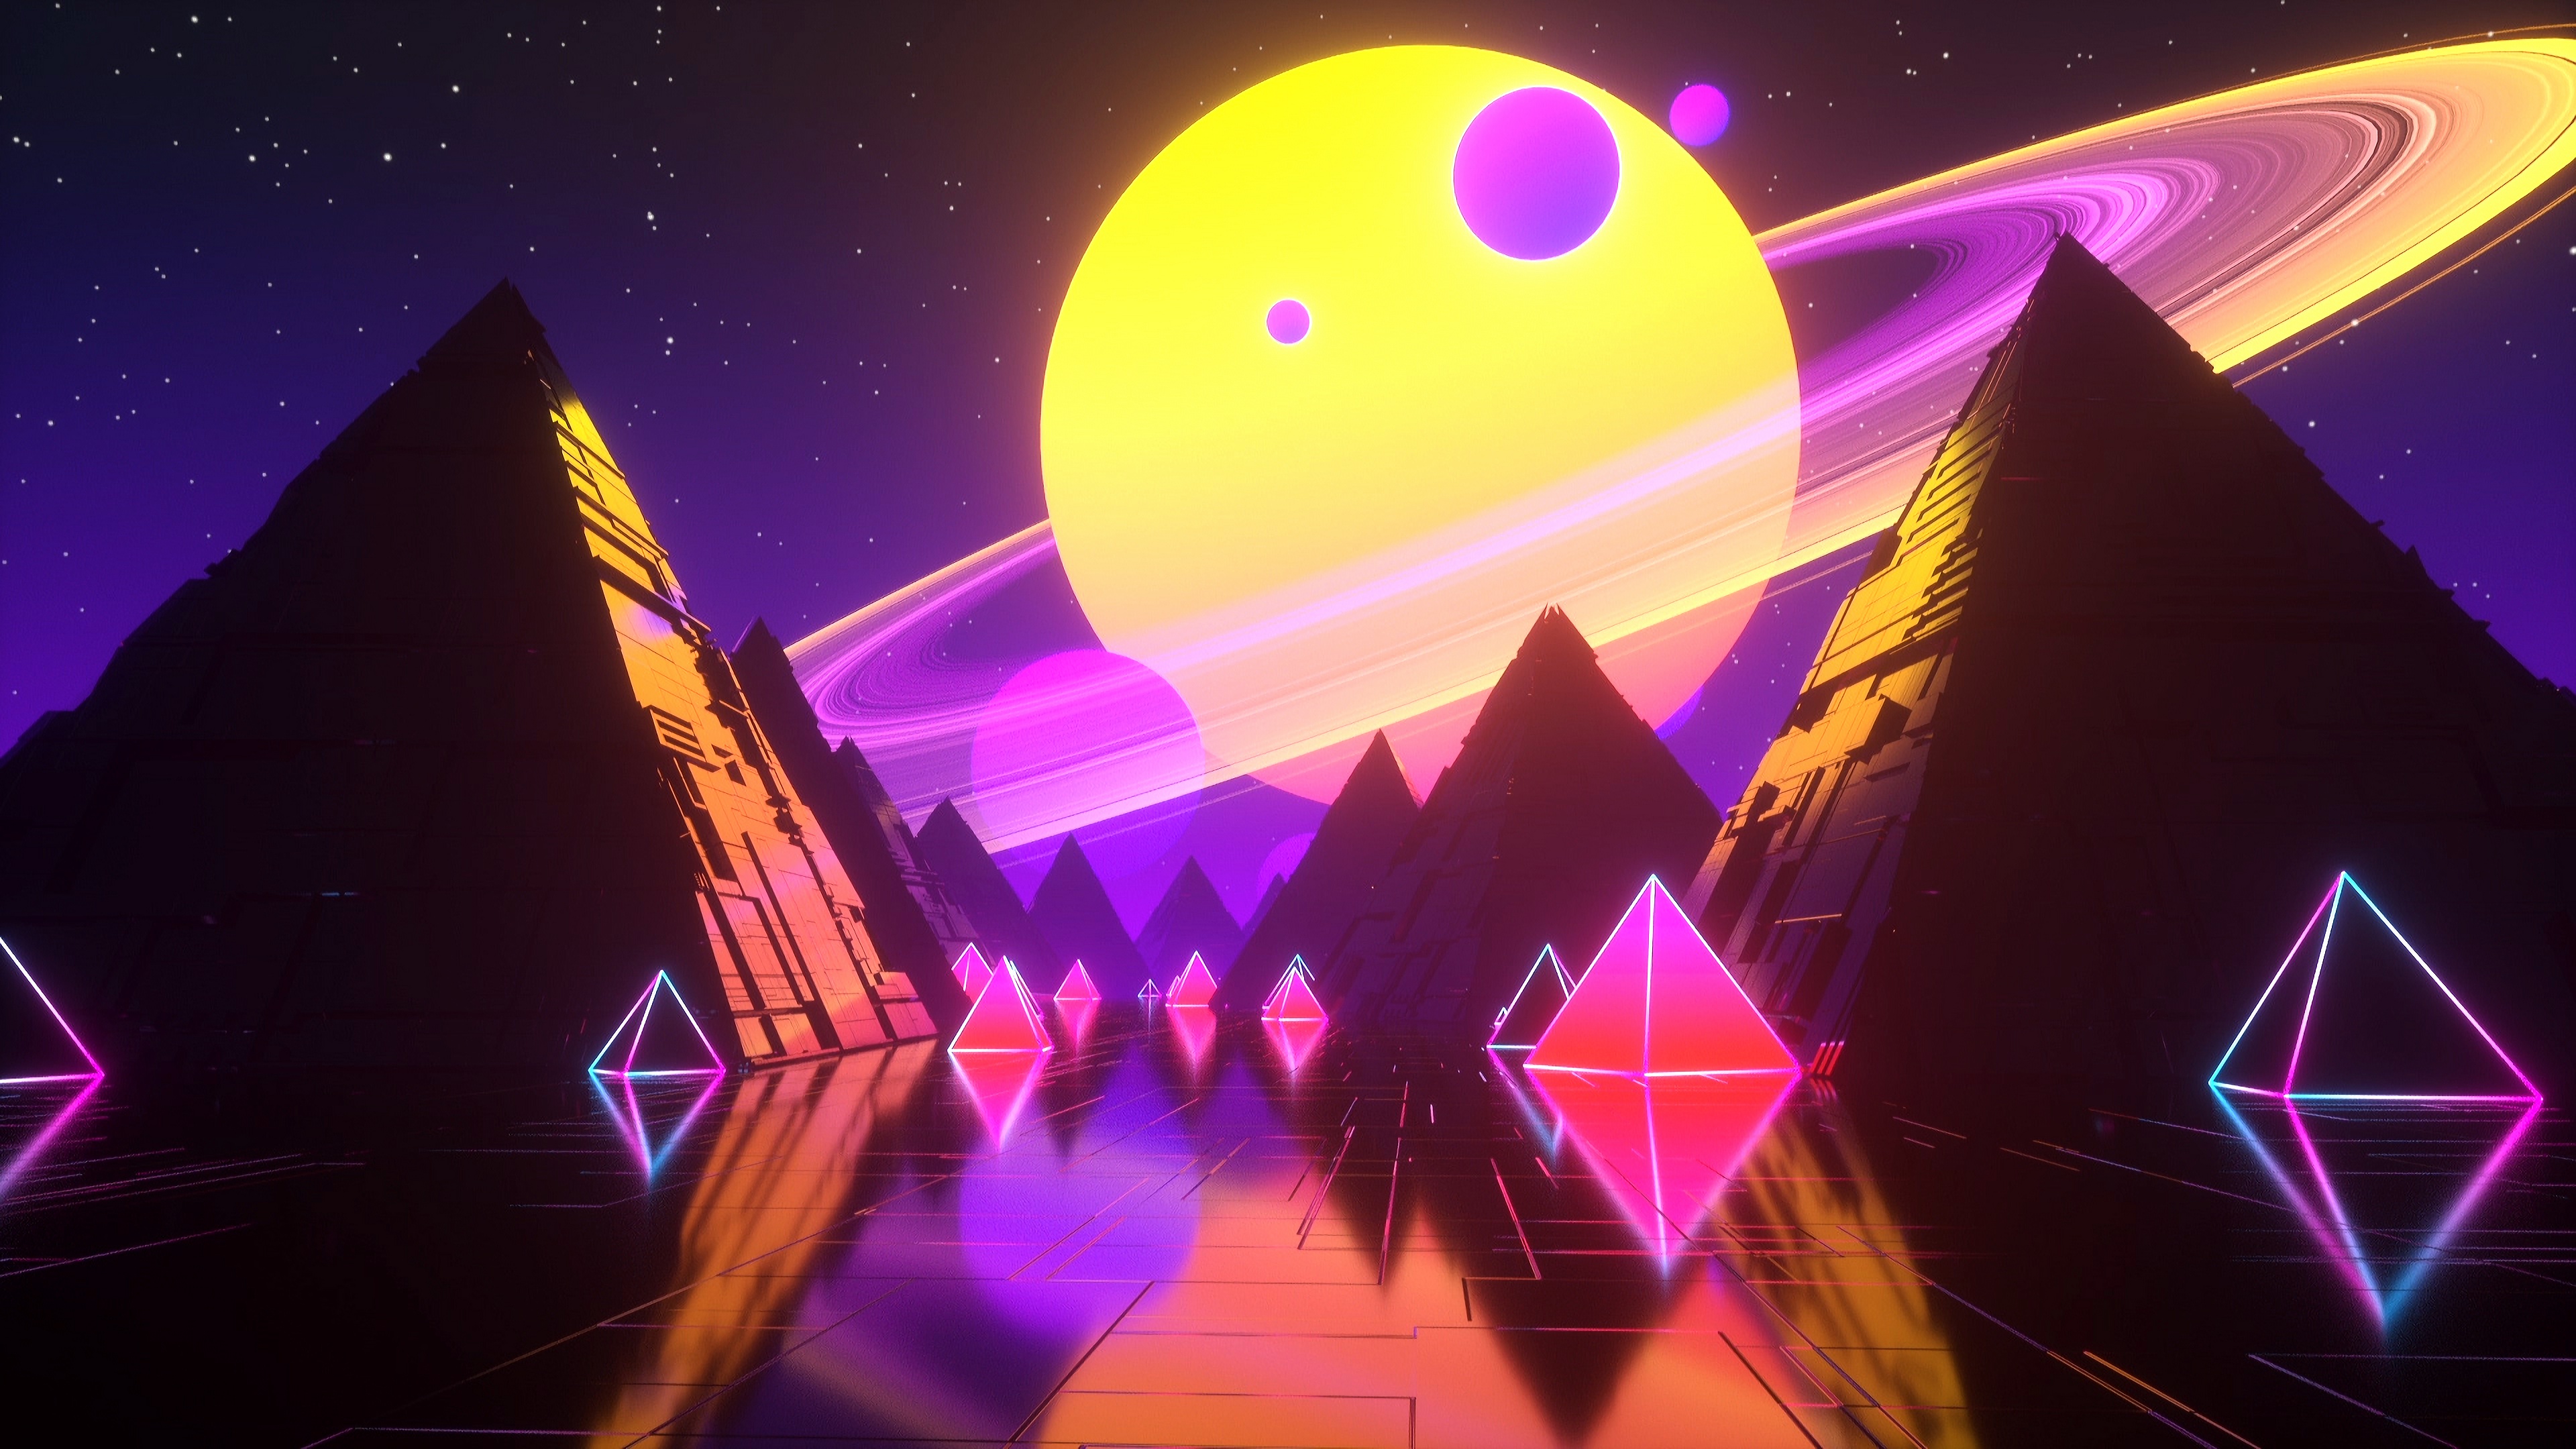 General 3840x2160 digital art synthwave colorful abstract planet planetary rings stars pyramid